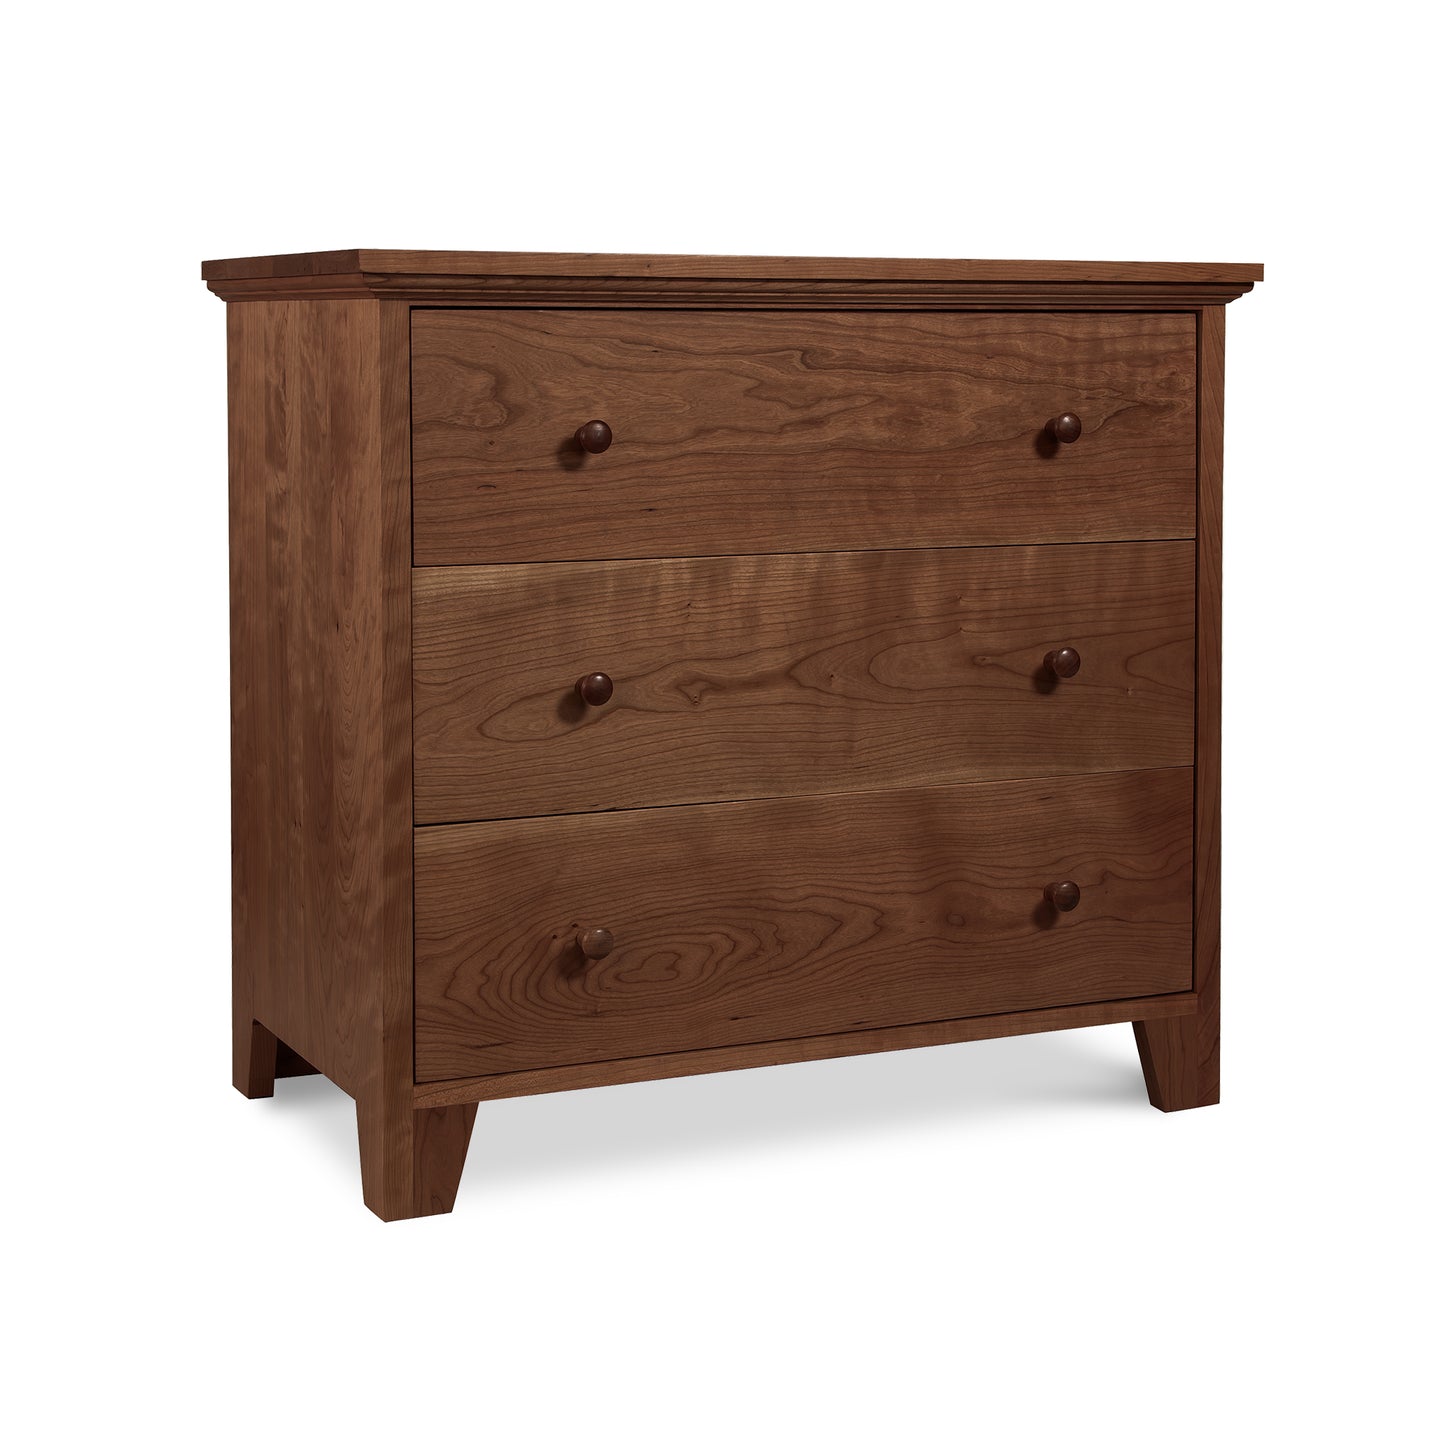 A Lyndon Furniture American Country 3-Drawer Chest, handmade in Vermont, on a white background.